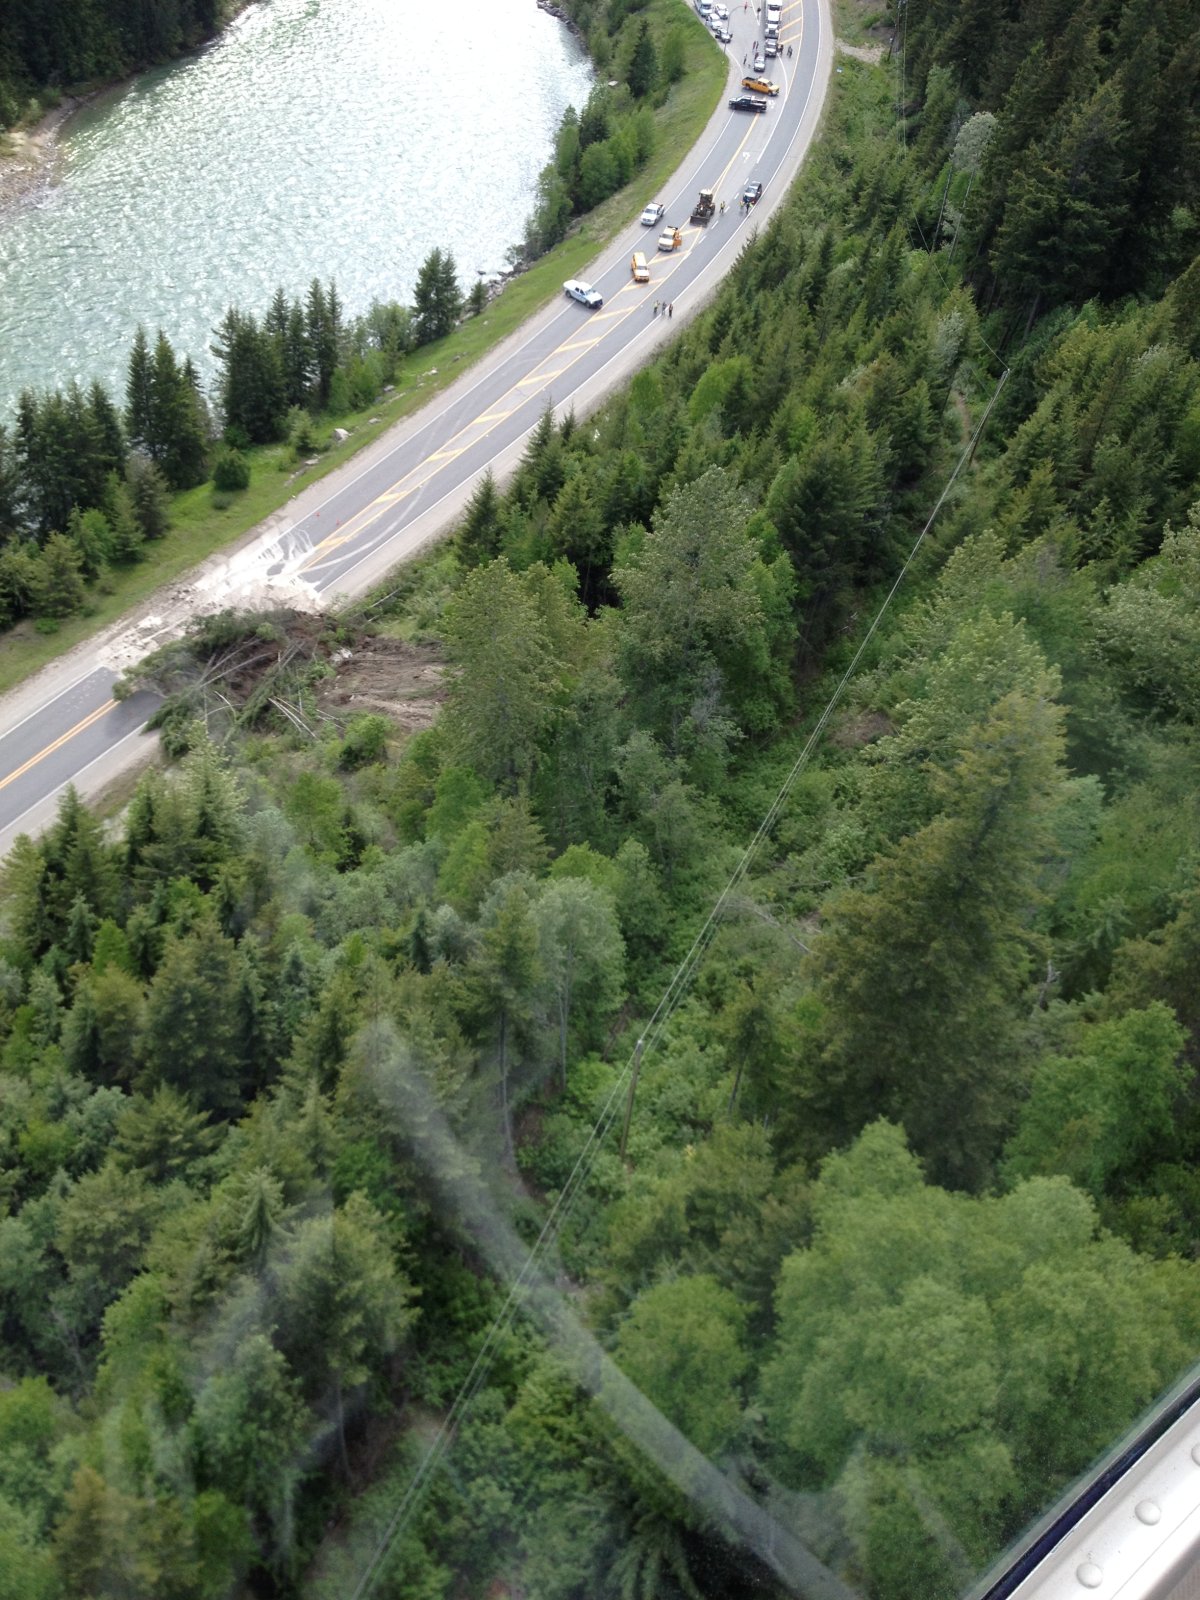 The first mudslide that occurred on Highway 16. June 7,2014.